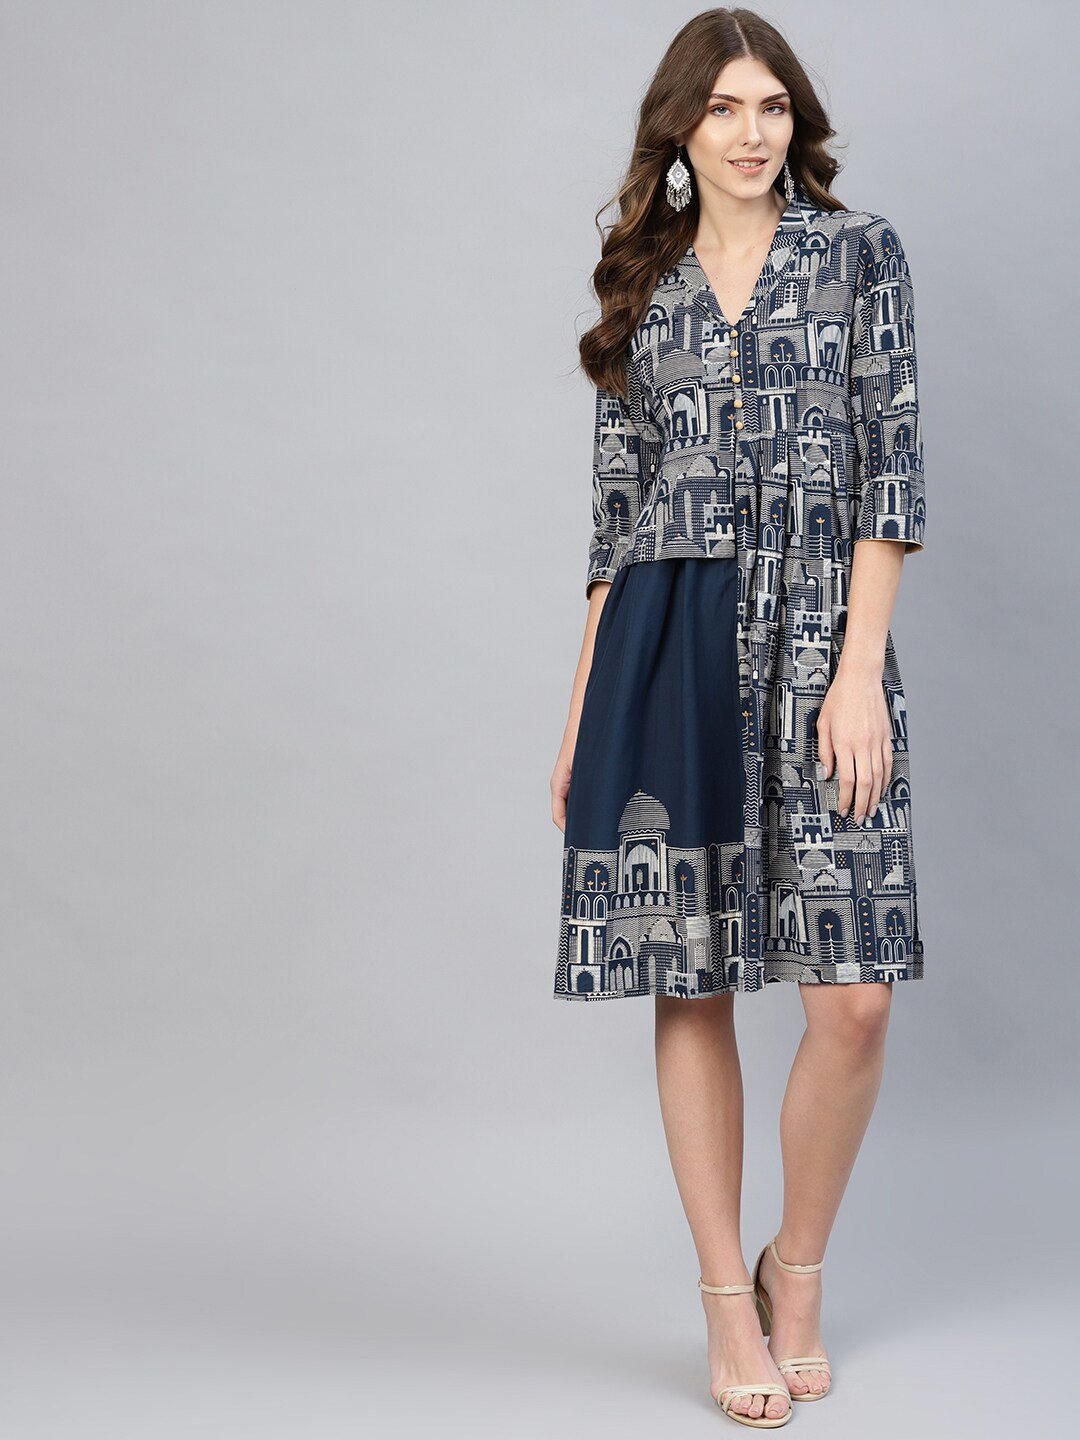 Women's  Navy & Off-White Printed Layered A-Line Dress - AKS